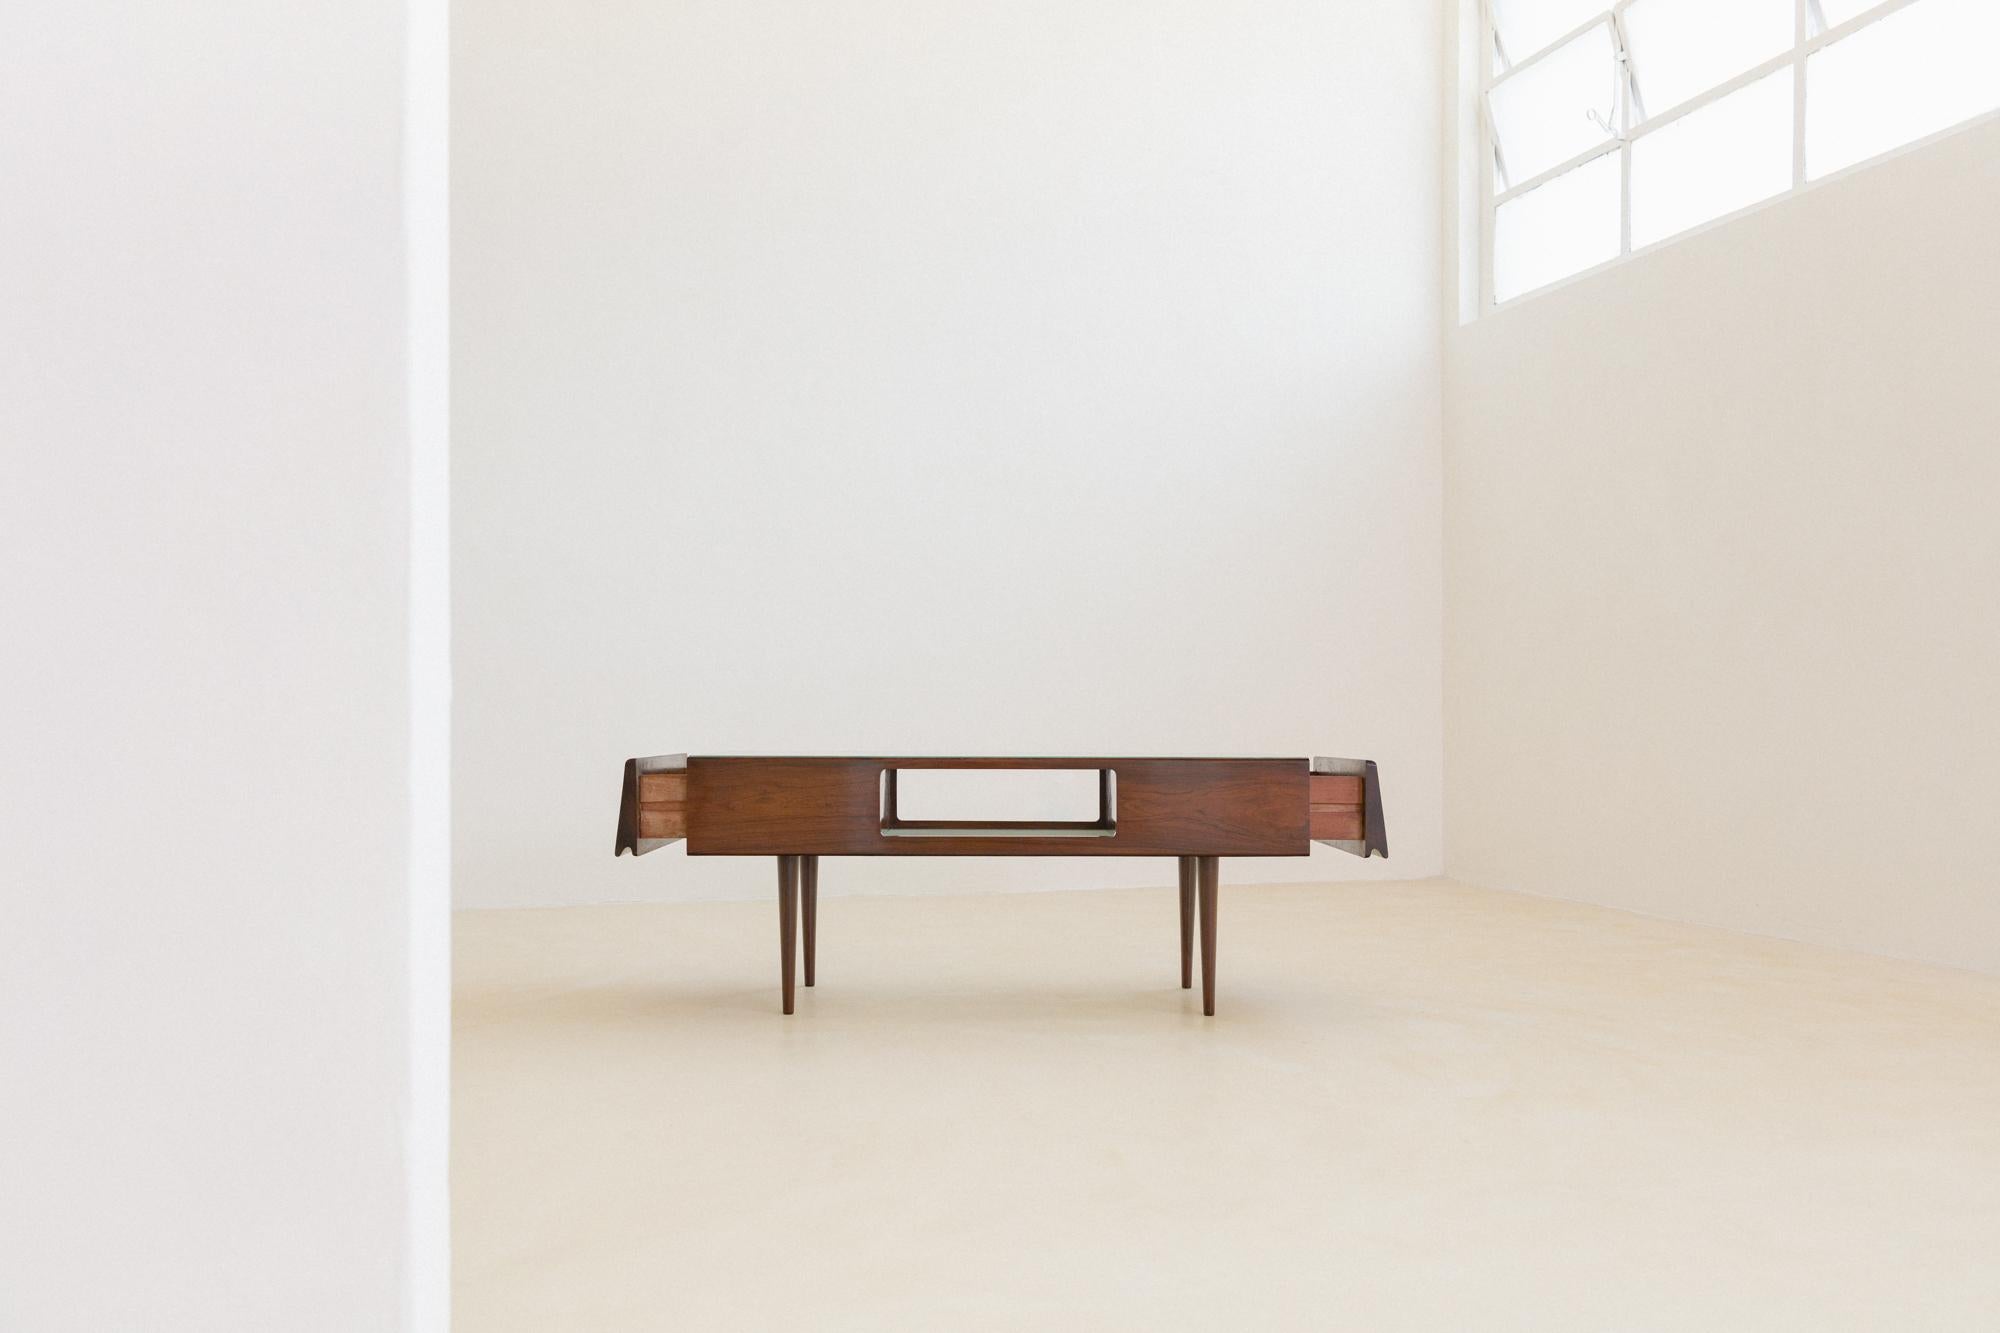 This coffee table in rosewood was designed by Martin Eisler (1913-1977) for Forma S.A. Móveis e Objetos de Arte. This piece refers to a furniture typology common at midcentury and very produced by Forma: the showcase table.

The coffee table is